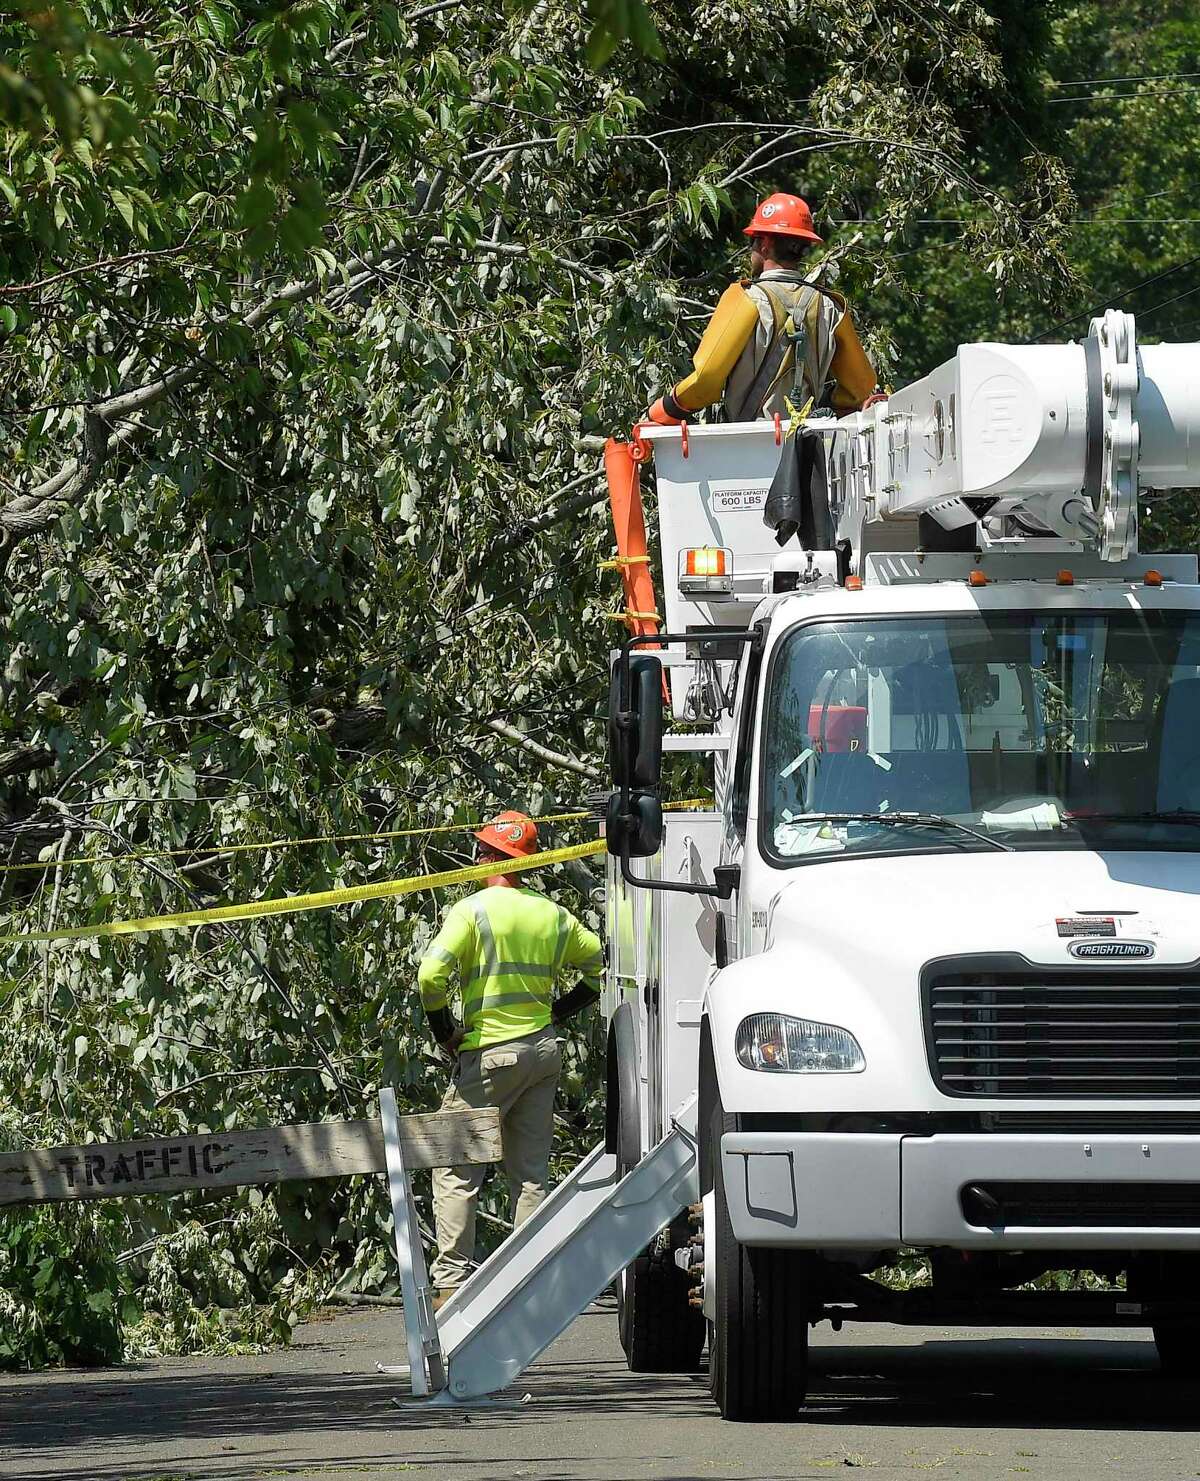 A utility crew from Asplundh Construction work to restore power in the Shippan neighborhood on August 5, 2020 in Stamford, Connecticut. Just 24 hours has passed since Tropical Storm Isaias pass through the region bringing heavy surf and damaging winds that has left over 9,000 Eversource customers in Stamford without power.